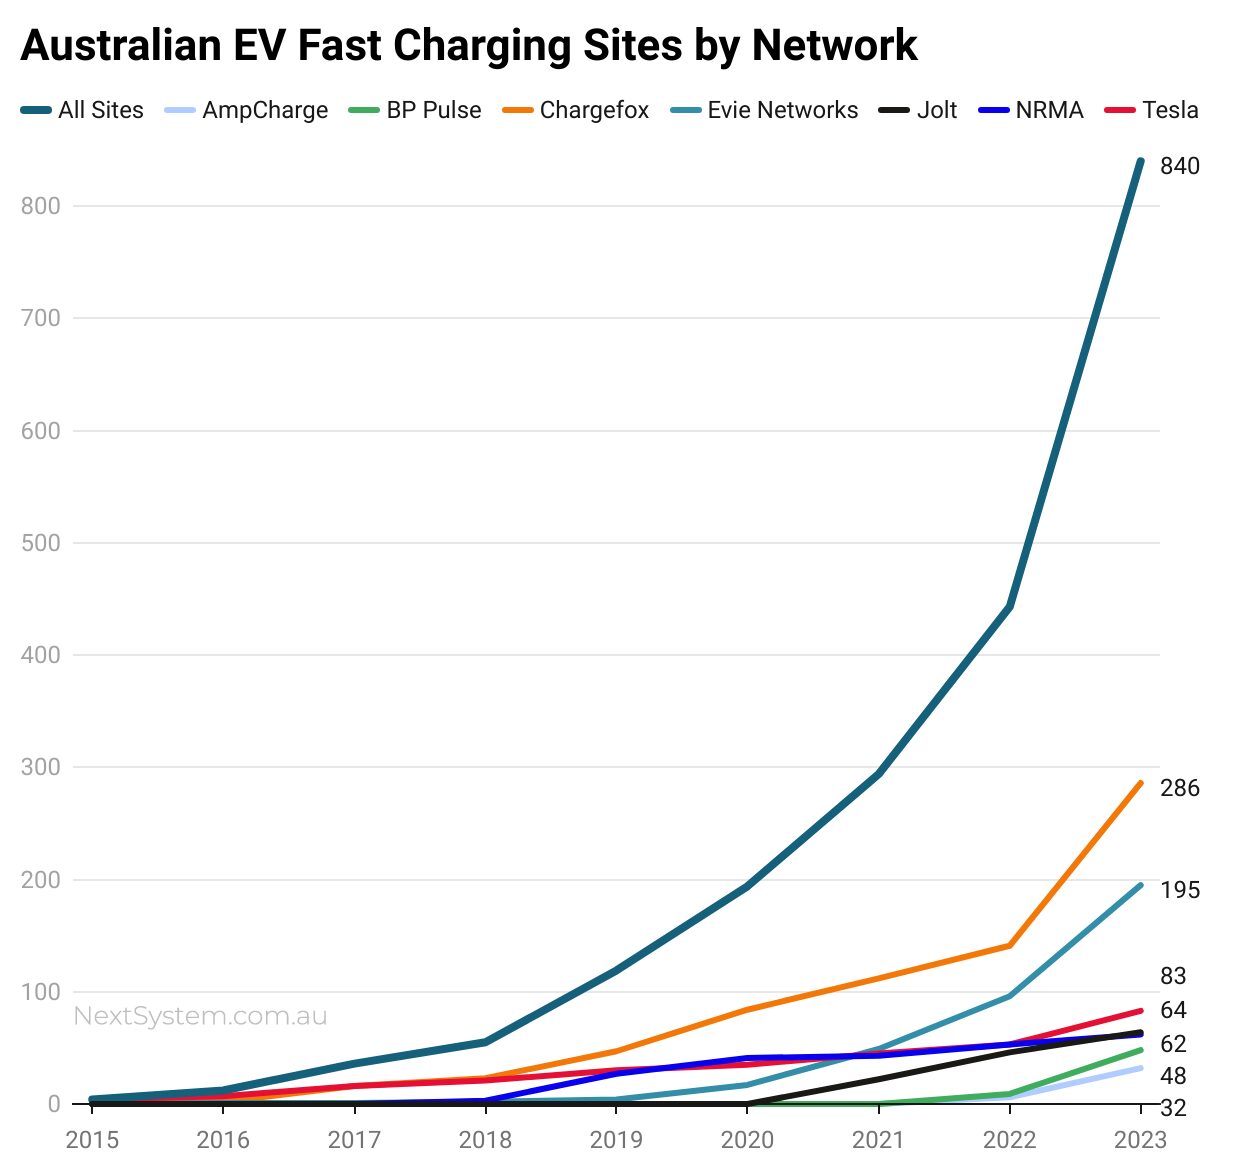 Australian EV Fast Charging Sites by Network